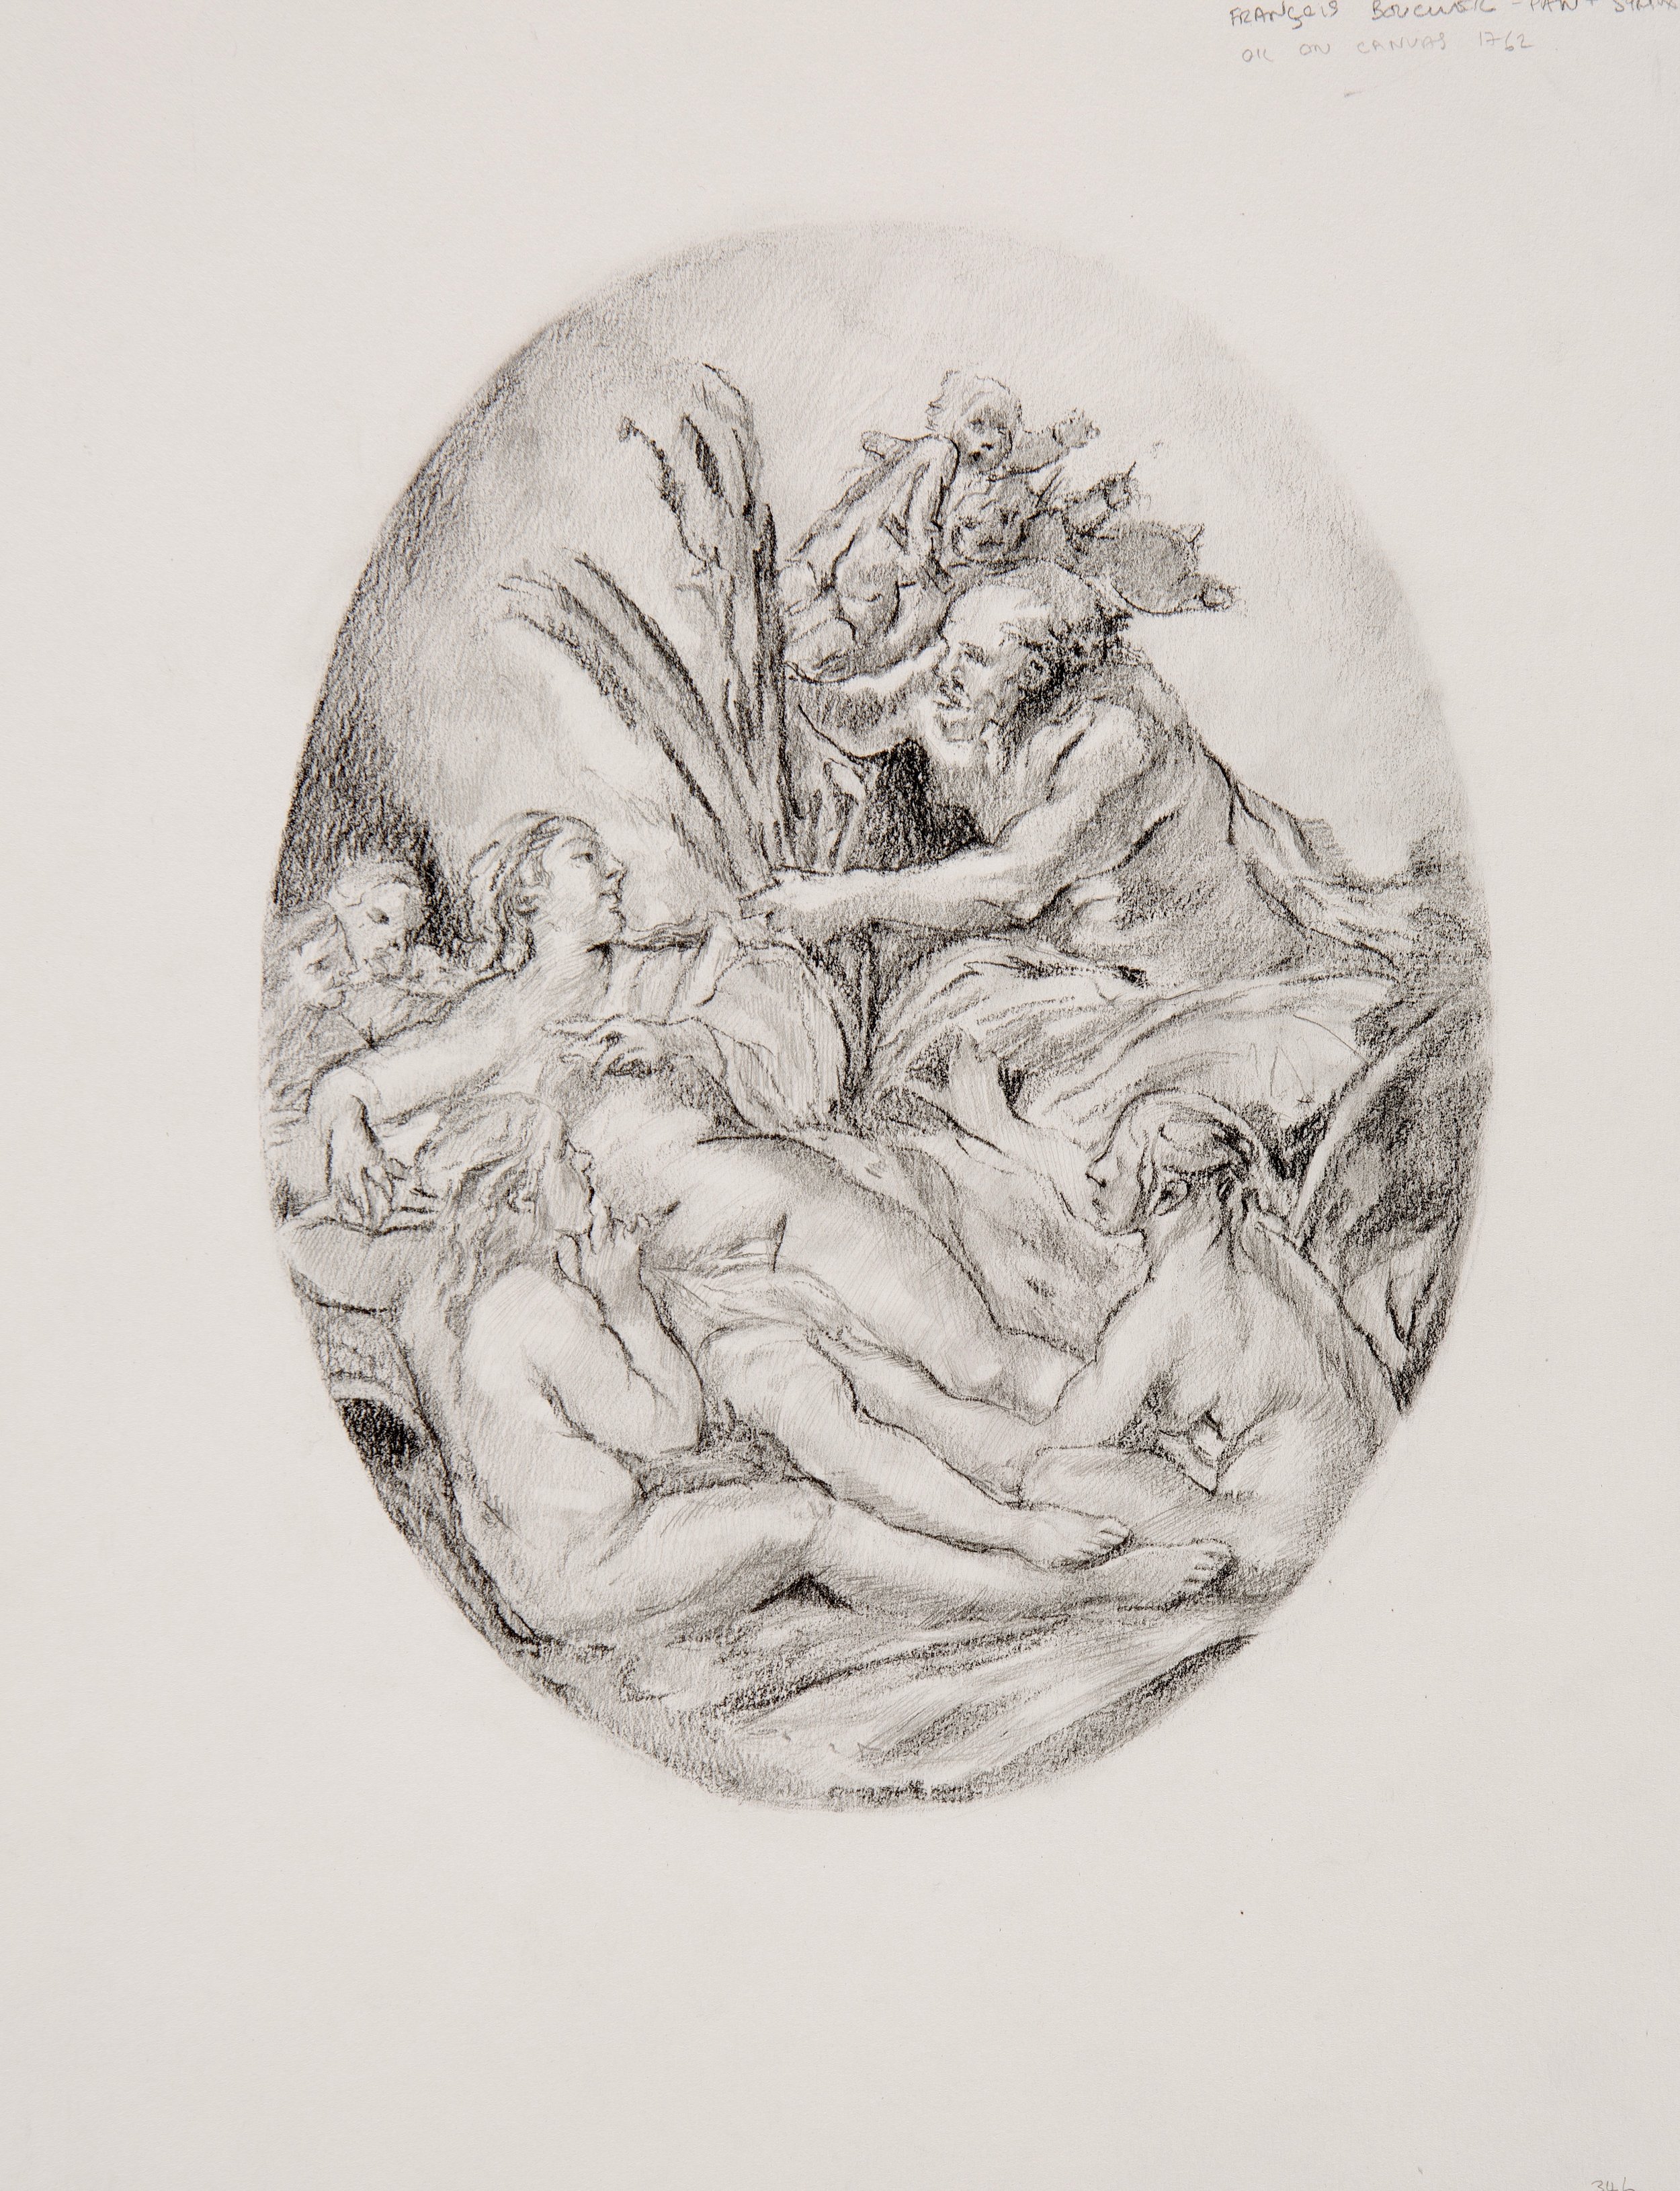 Study after 'Pan and Syrinx,' 1760 - 1765, François Boucher